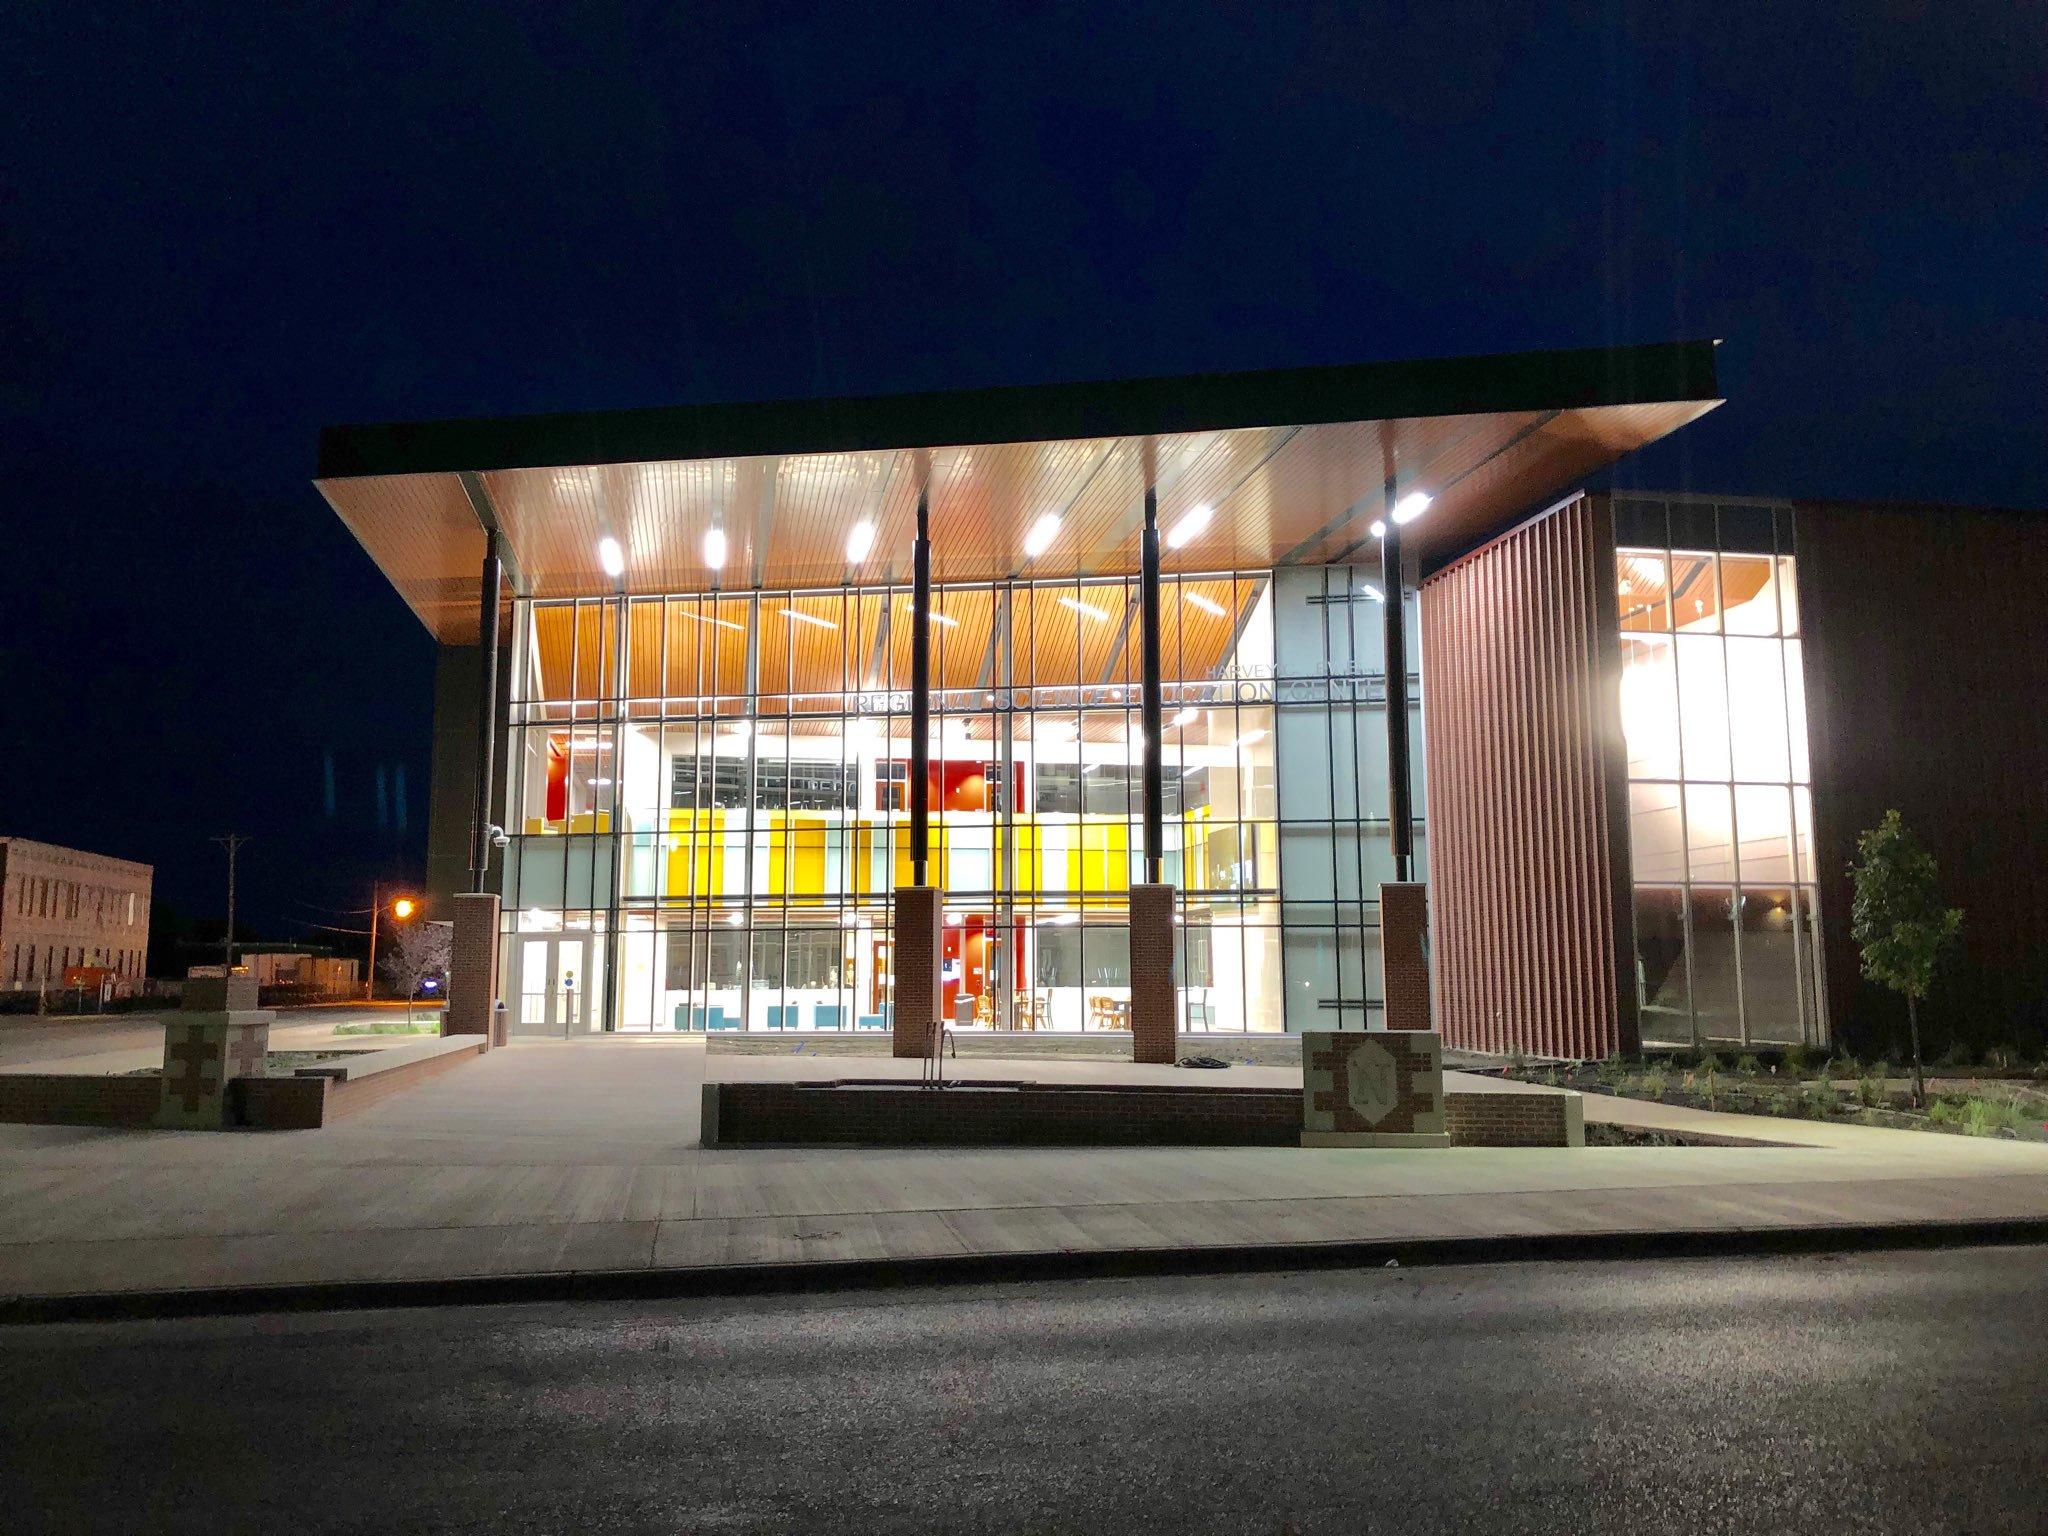 Front view of the Jewett Regional Science Education Center at night